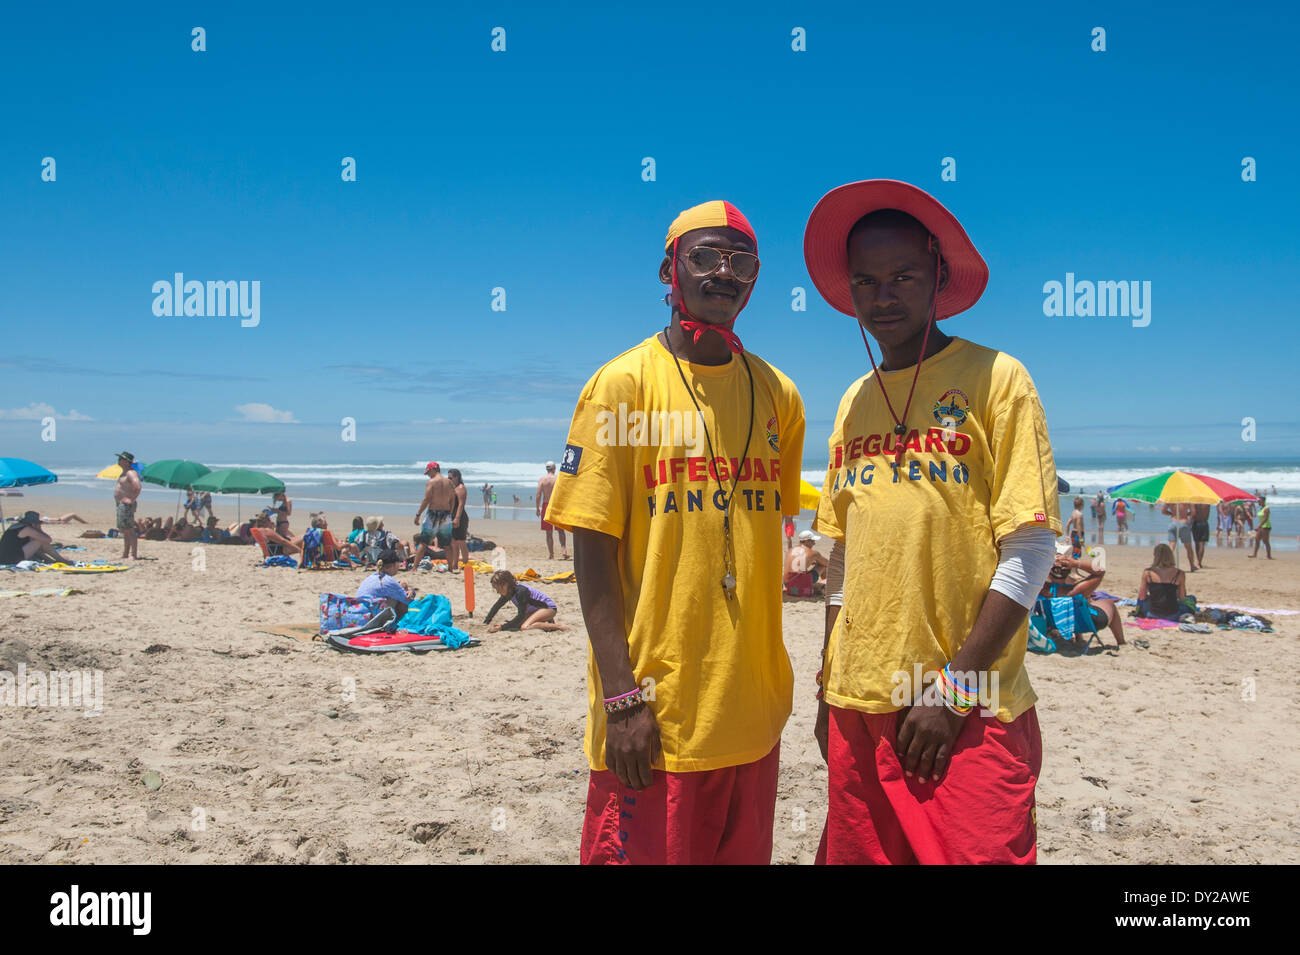 Lifeguards and holidaymakers on the beach of Morgan Bay, Eastern Cape, South Africa Stock Photo